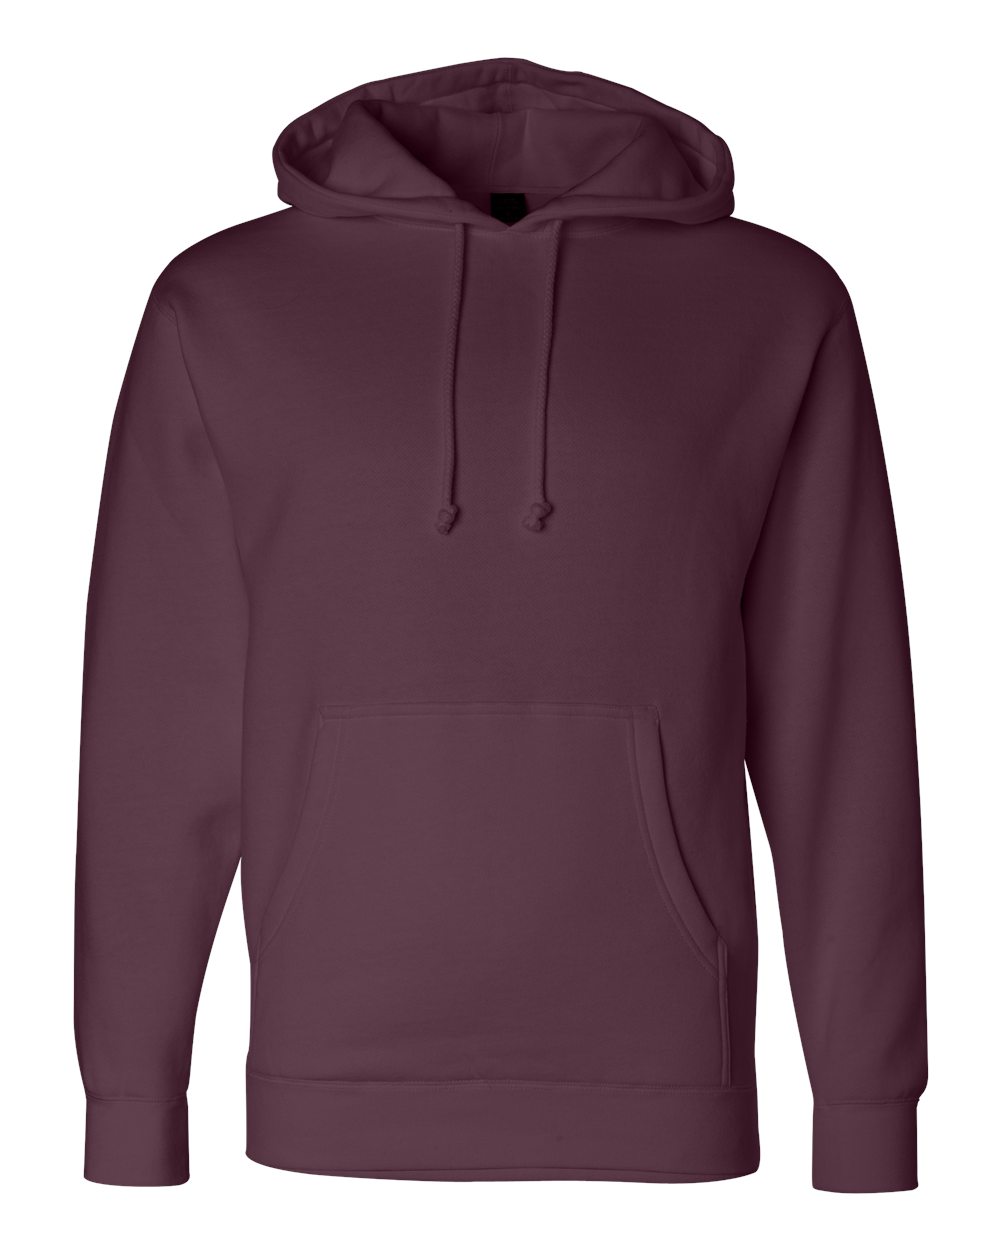 Independent Trading Co. IND4000C Hooded Pullover Sweatshirt $17.66